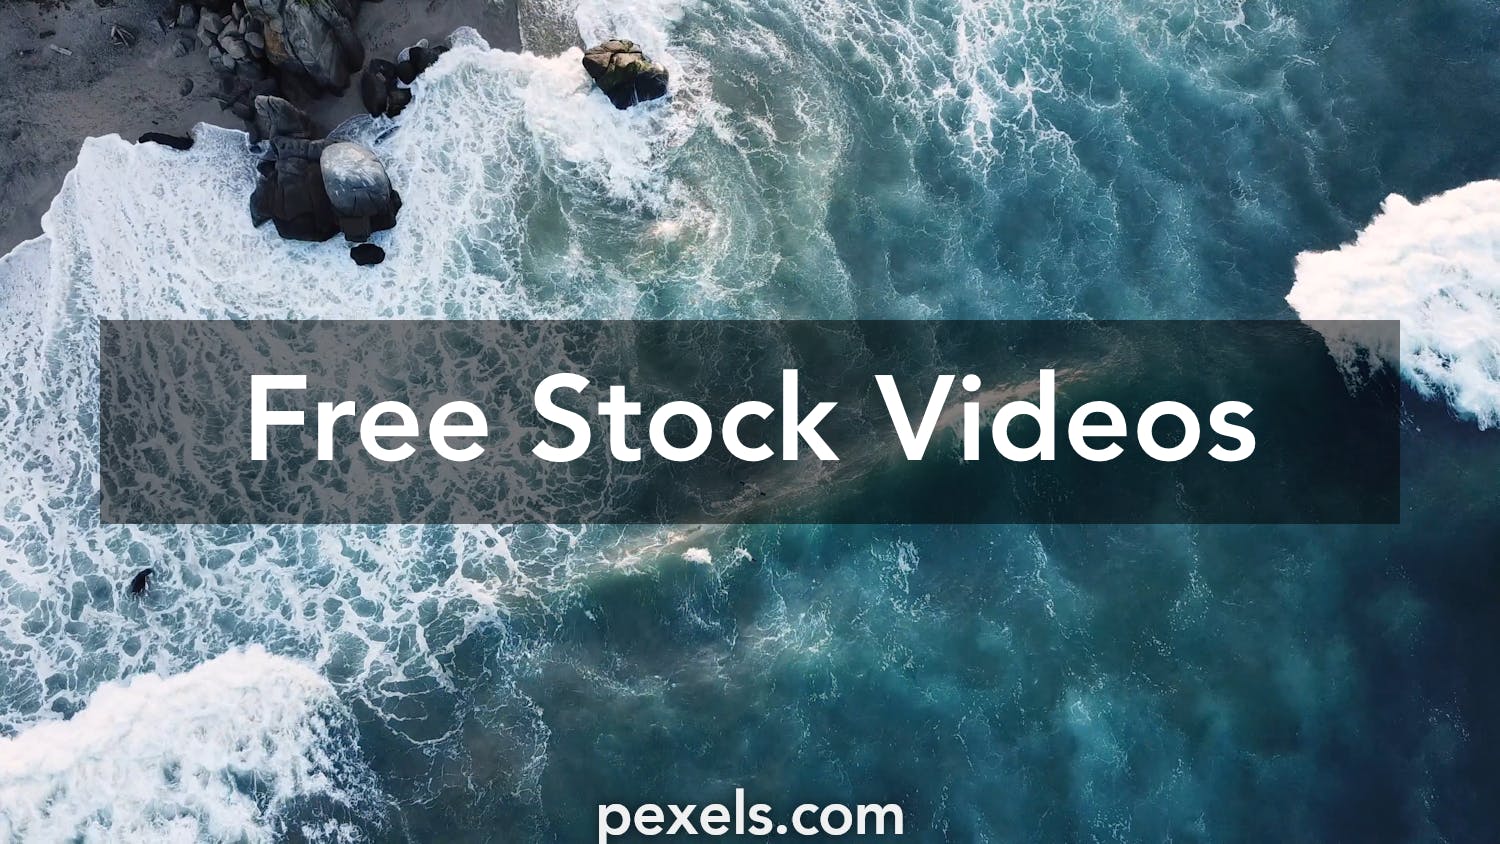 Nature Videos, Download The BEST Free 4k Stock Video Footage & Nature HD Video  Clips